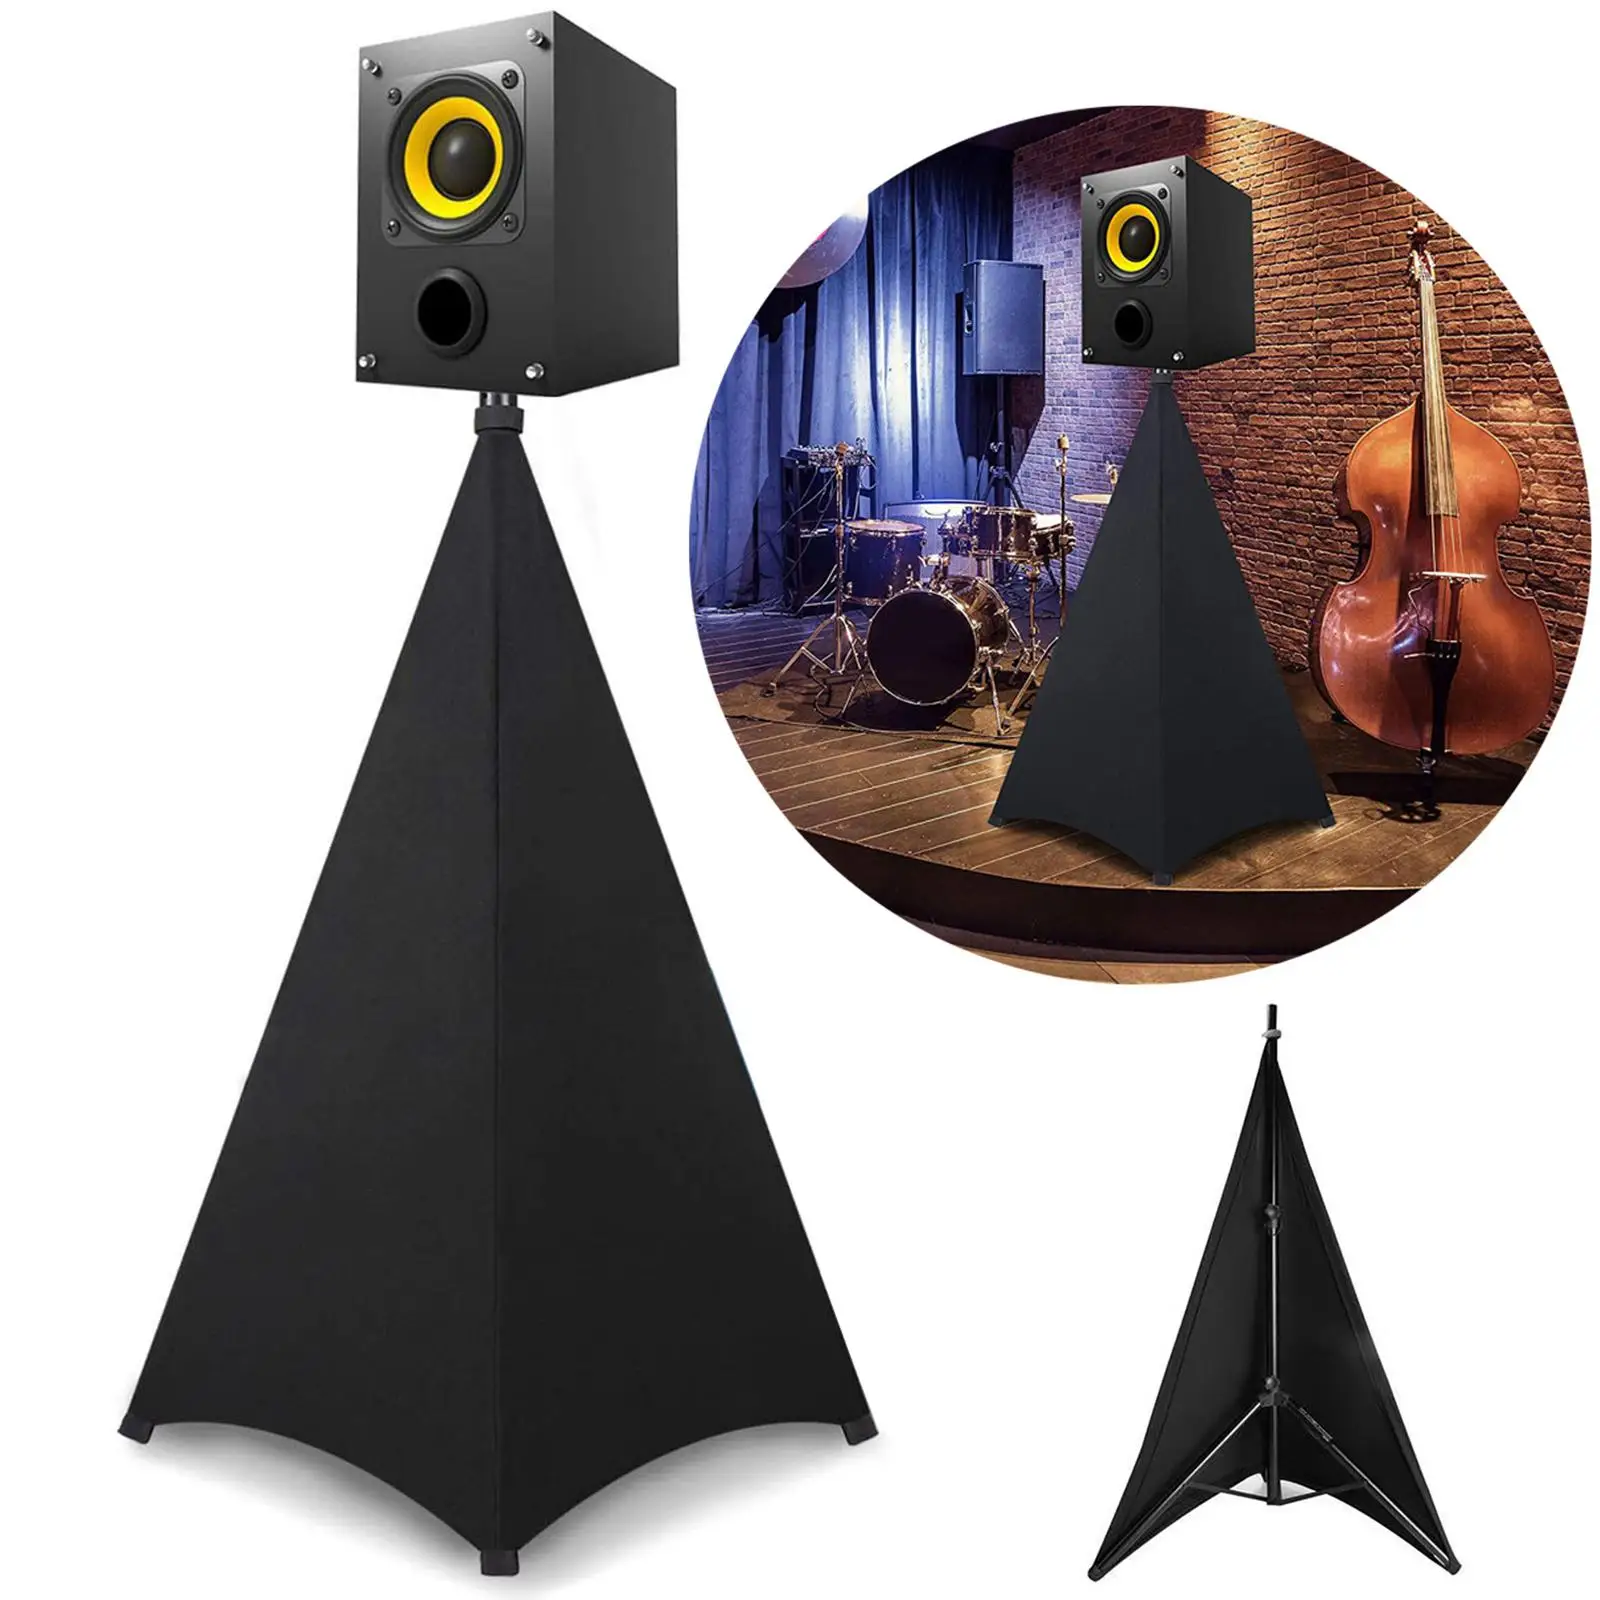 Universal Speaker Stand Cover Height Flexible Stretchable DJ Speaker Covers Tripod Stand Skirt Scrim for Weddings Events